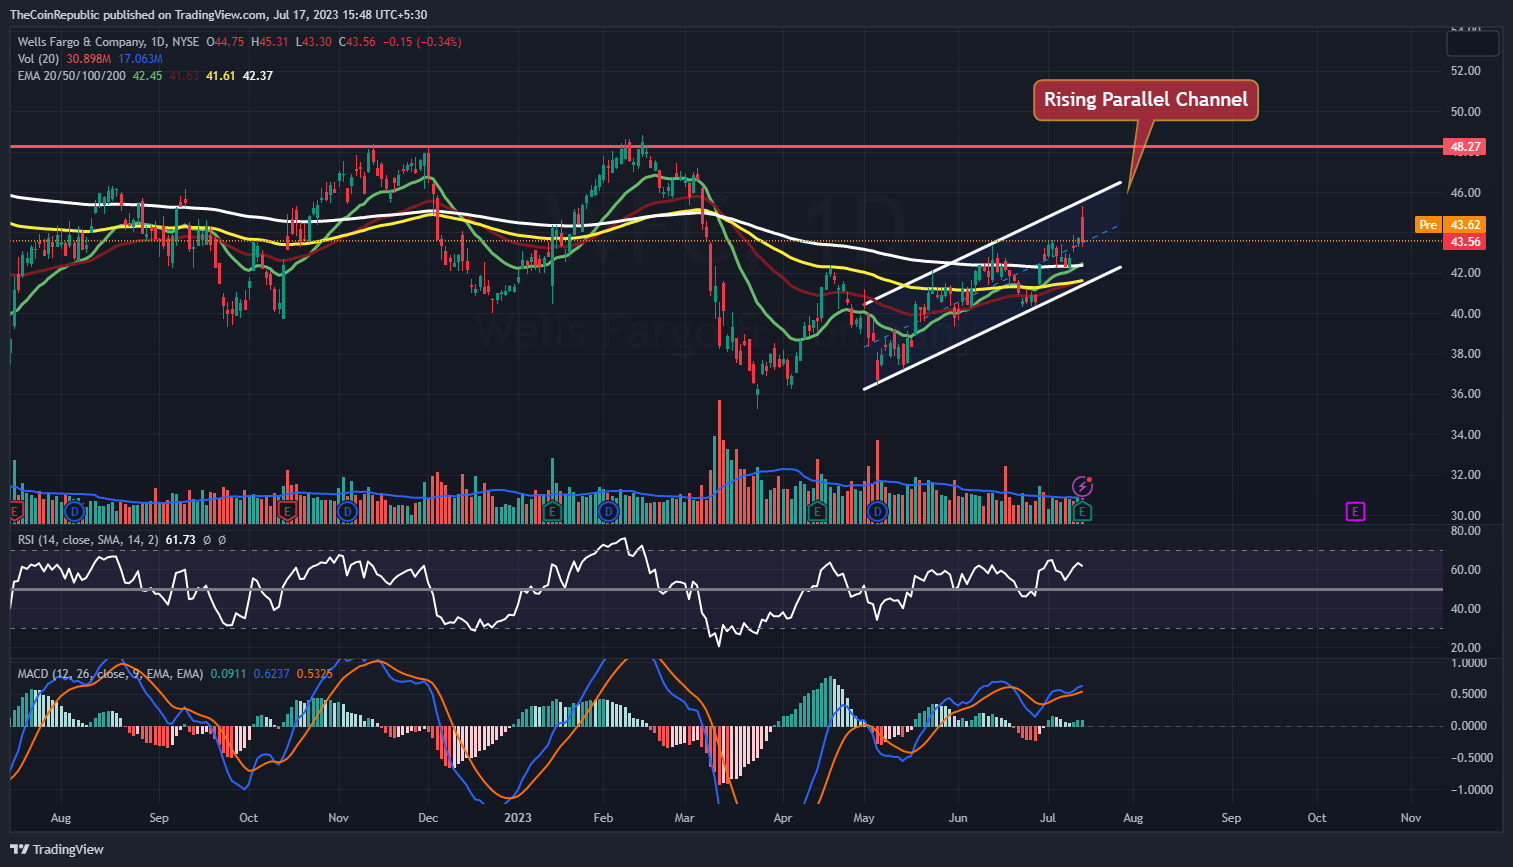 Wells Fargo & Co: WFC Stock Price Rising in an Interesting Channel